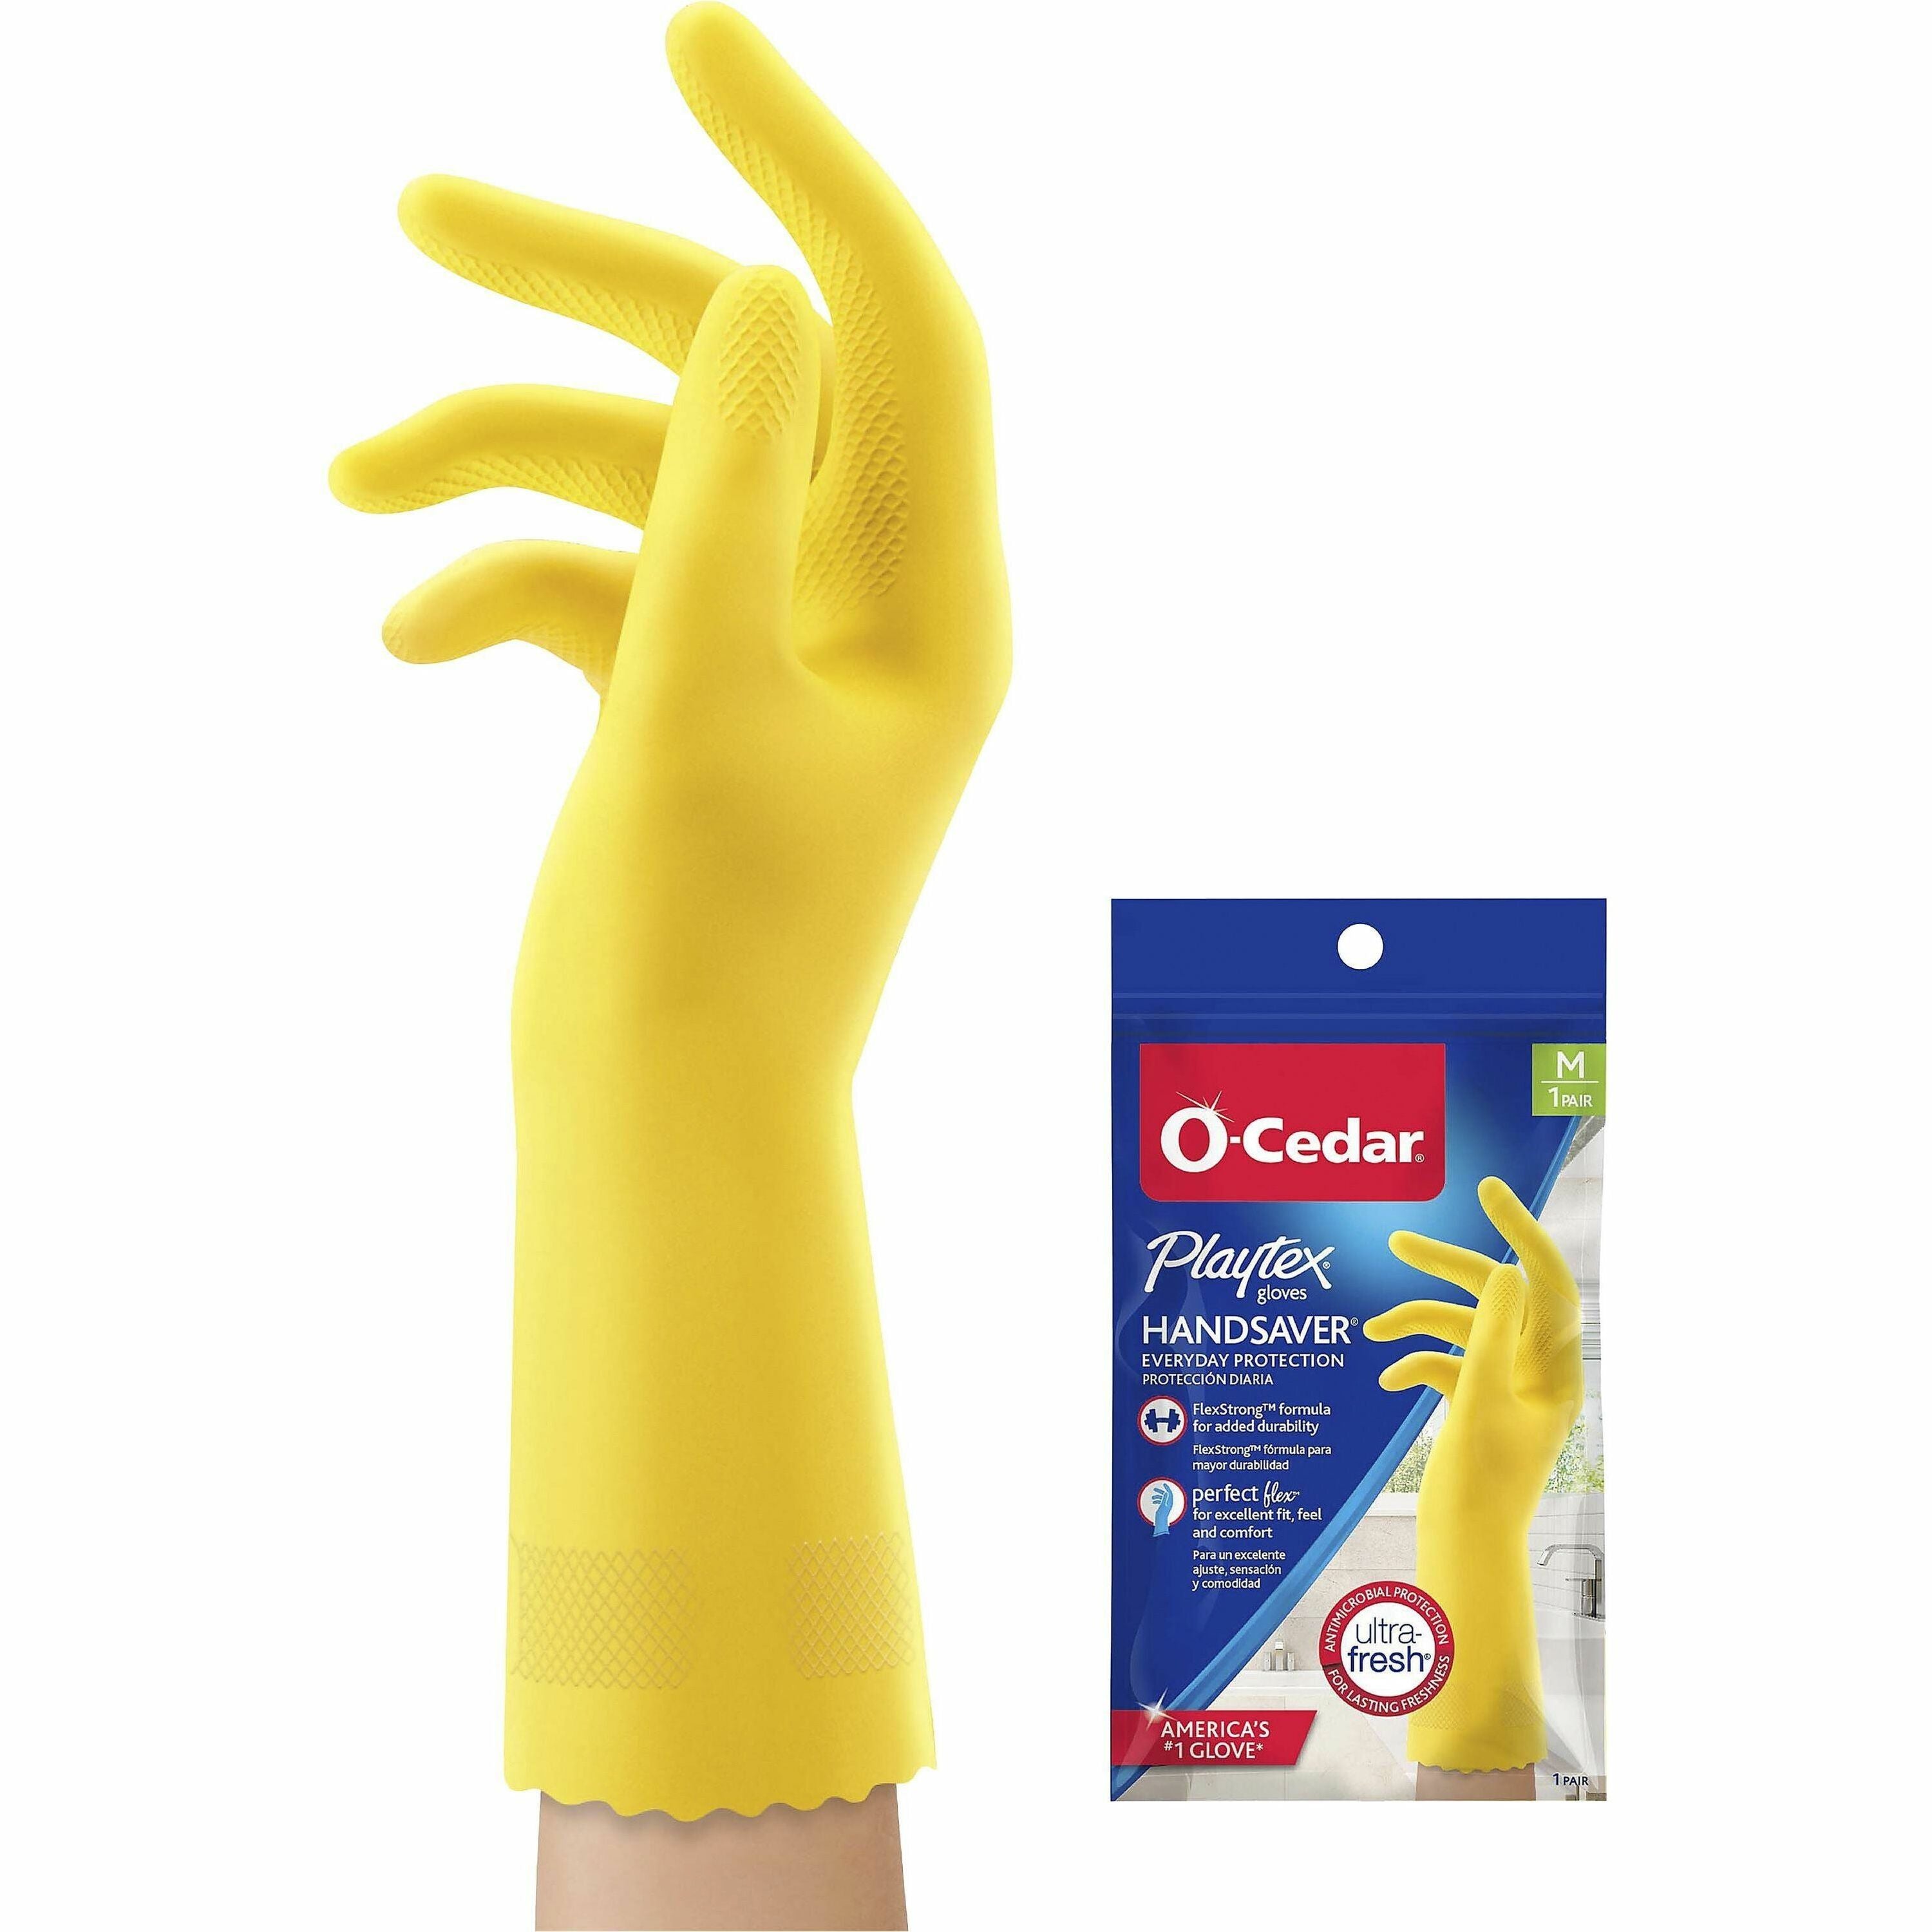 o-cedar-playtex-handsaver-gloves-hot-water-chemical-protection-medium-size-latex-nitrile-neoprene-yellow-long-lasting-durable-anti-microbial-odor-resistant-comfortable-textured-fingertip-textured-palm-reusable-for-household-cle_fhp163675 - 1